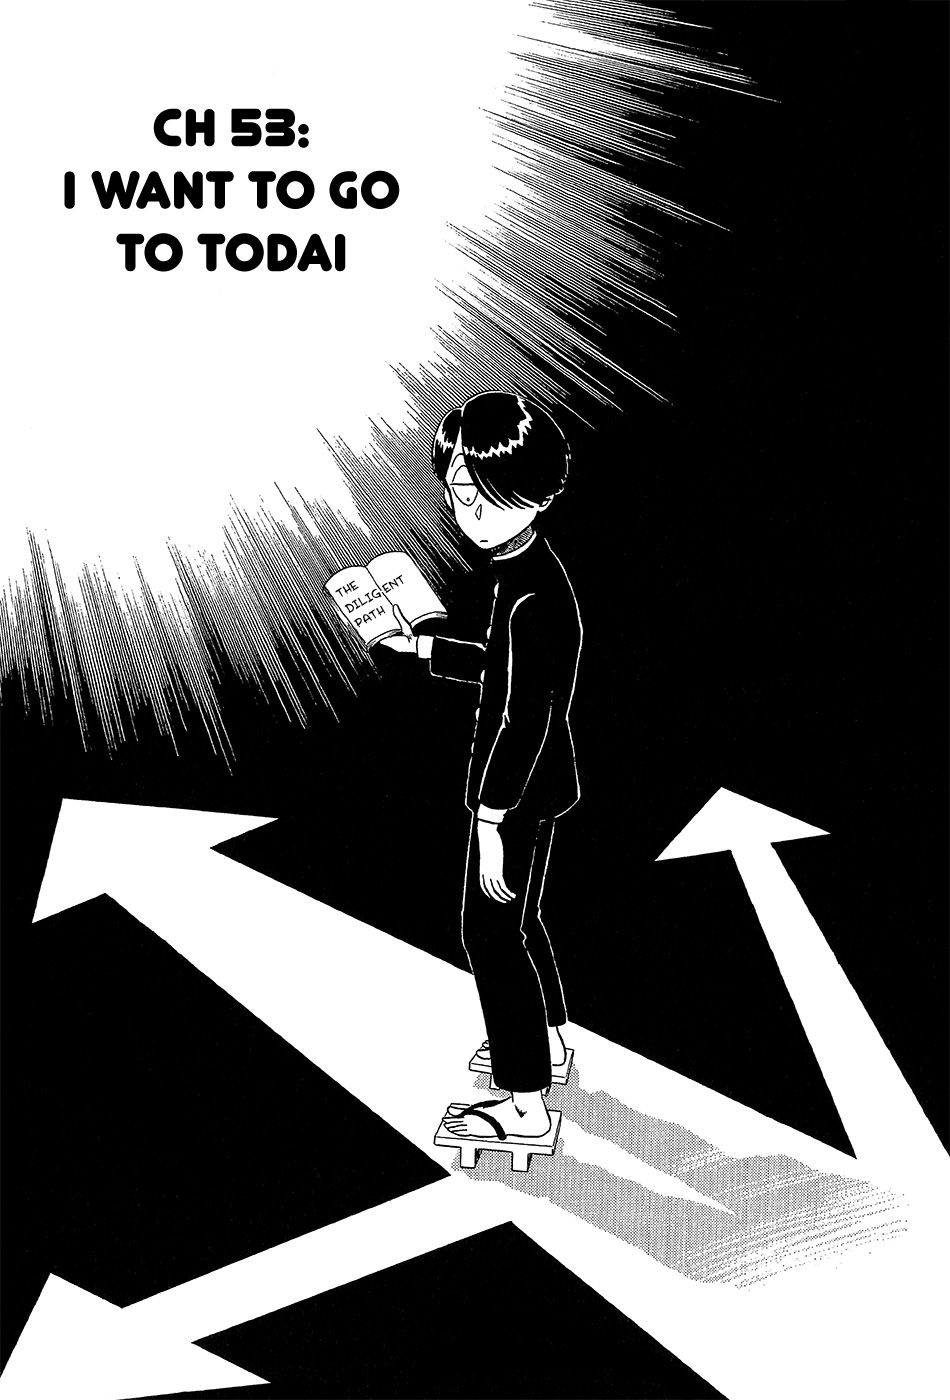 Kyuukyoku Choujin R Vol.5 Chapter 53: I Want To Go To Todai - Picture 2